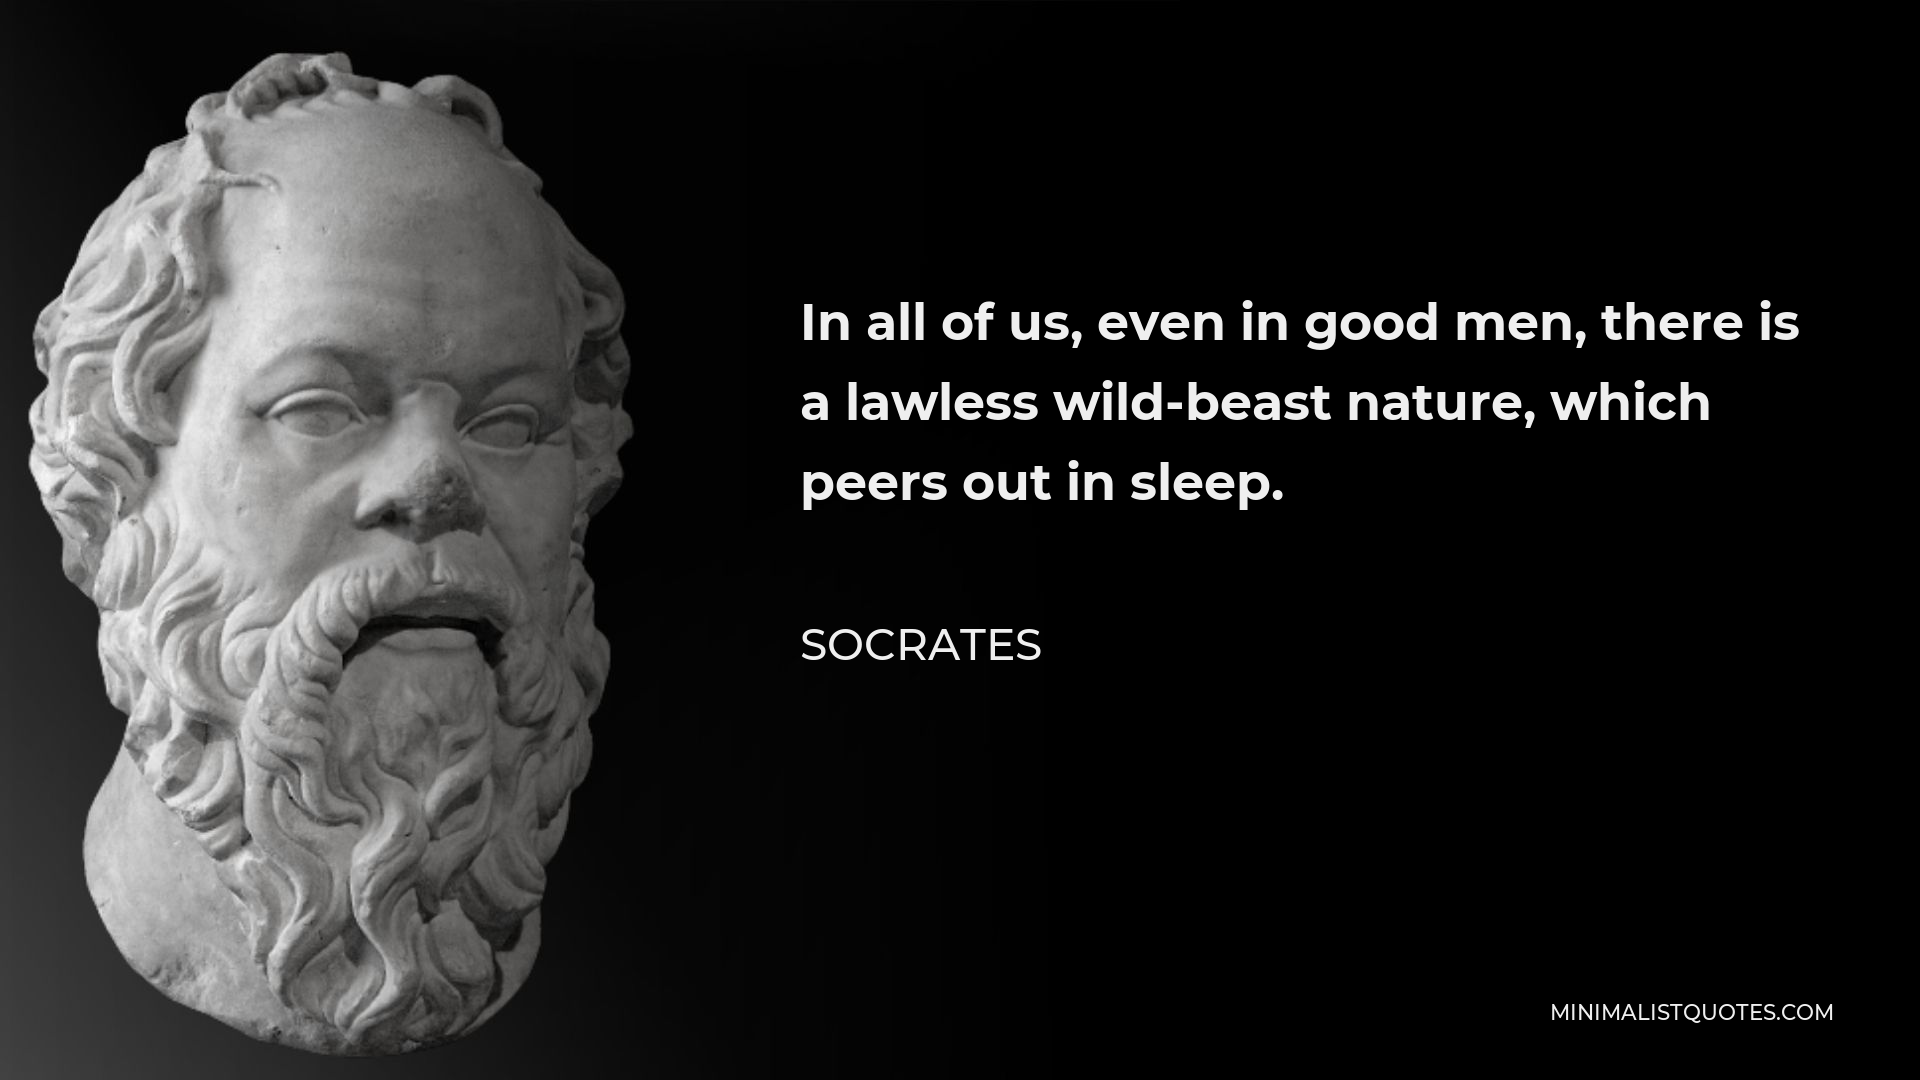 Socrates Quote - In all of us, even in good men, there is a lawless wild-beast nature, which peers out in sleep.